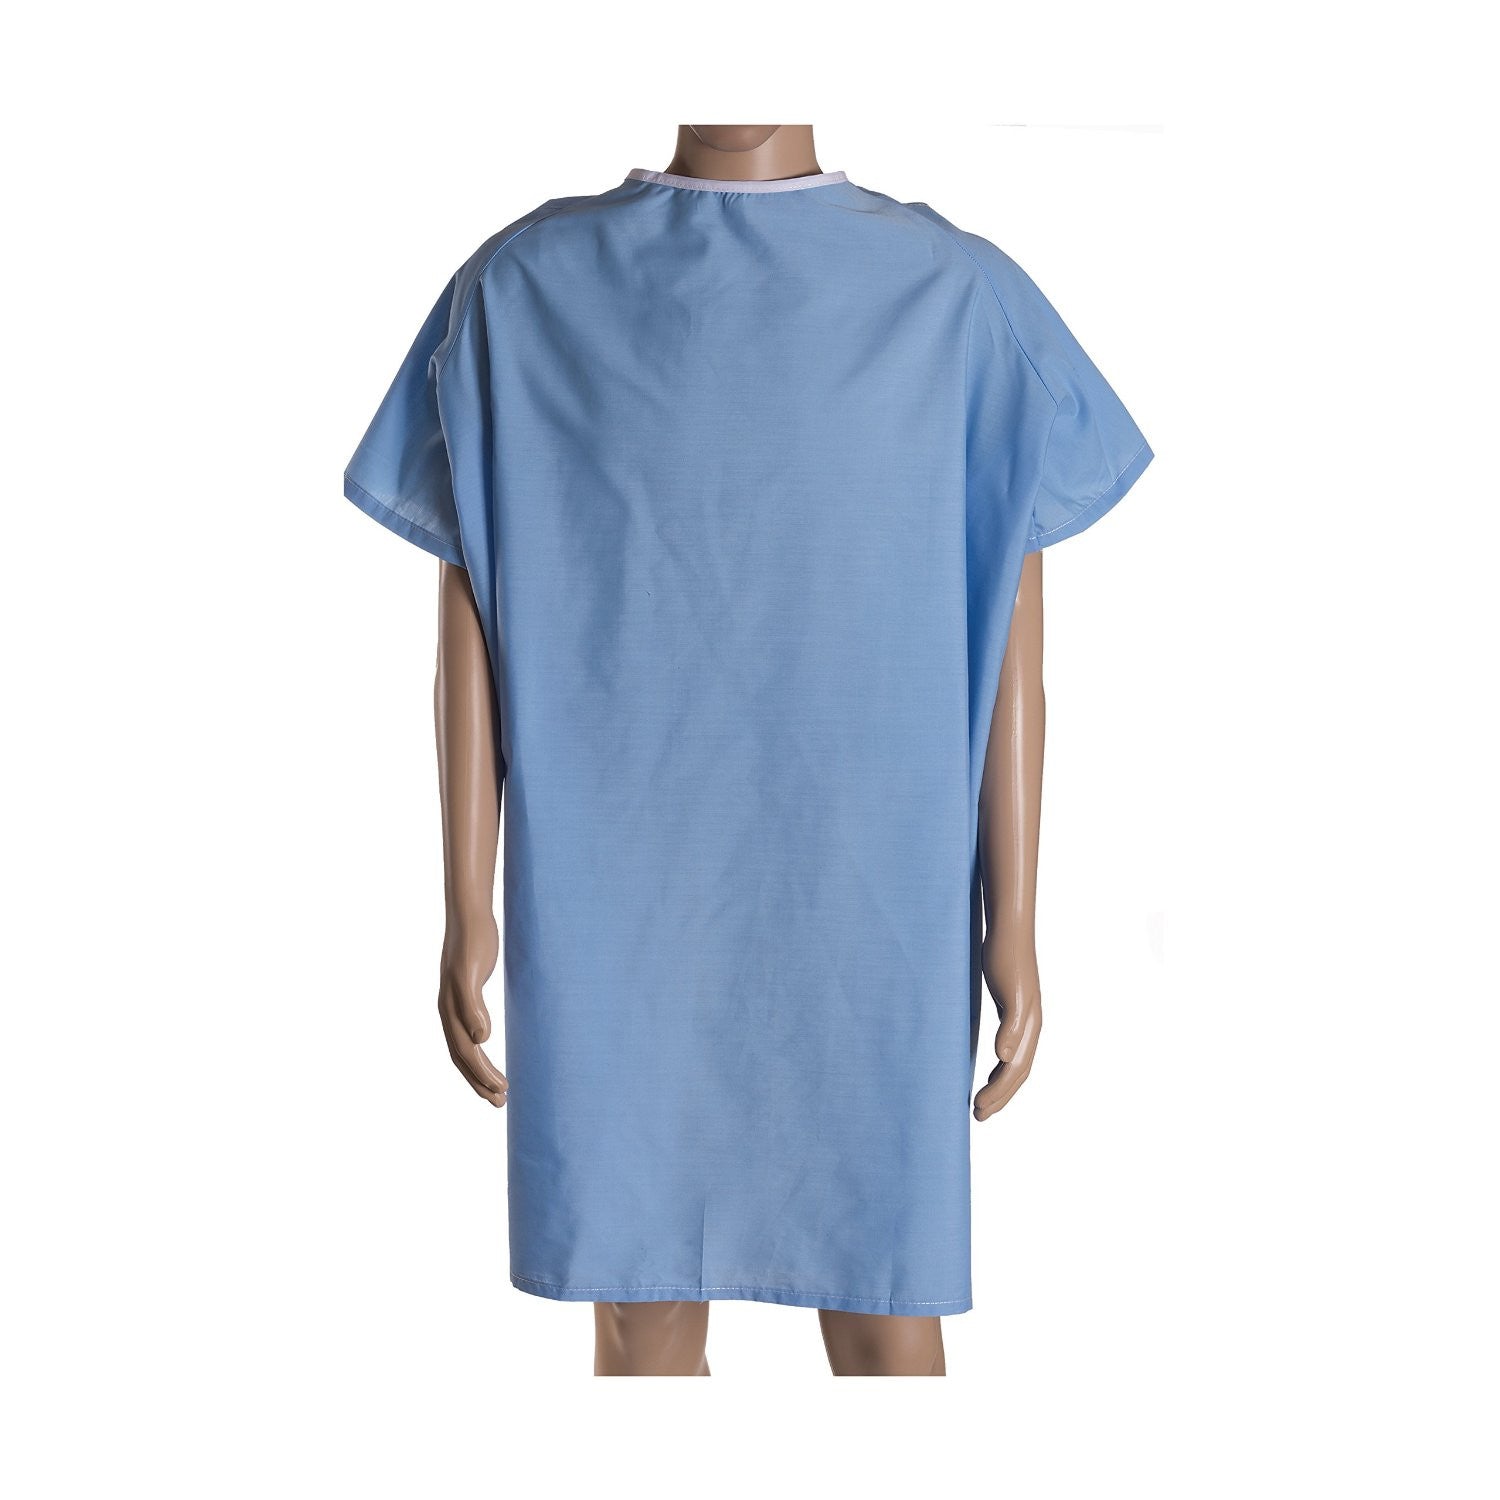 Swasti DR GOWN Gown Hospital Scrub Price in India - Buy Swasti DR GOWN Gown  Hospital Scrub online at Flipkart.com